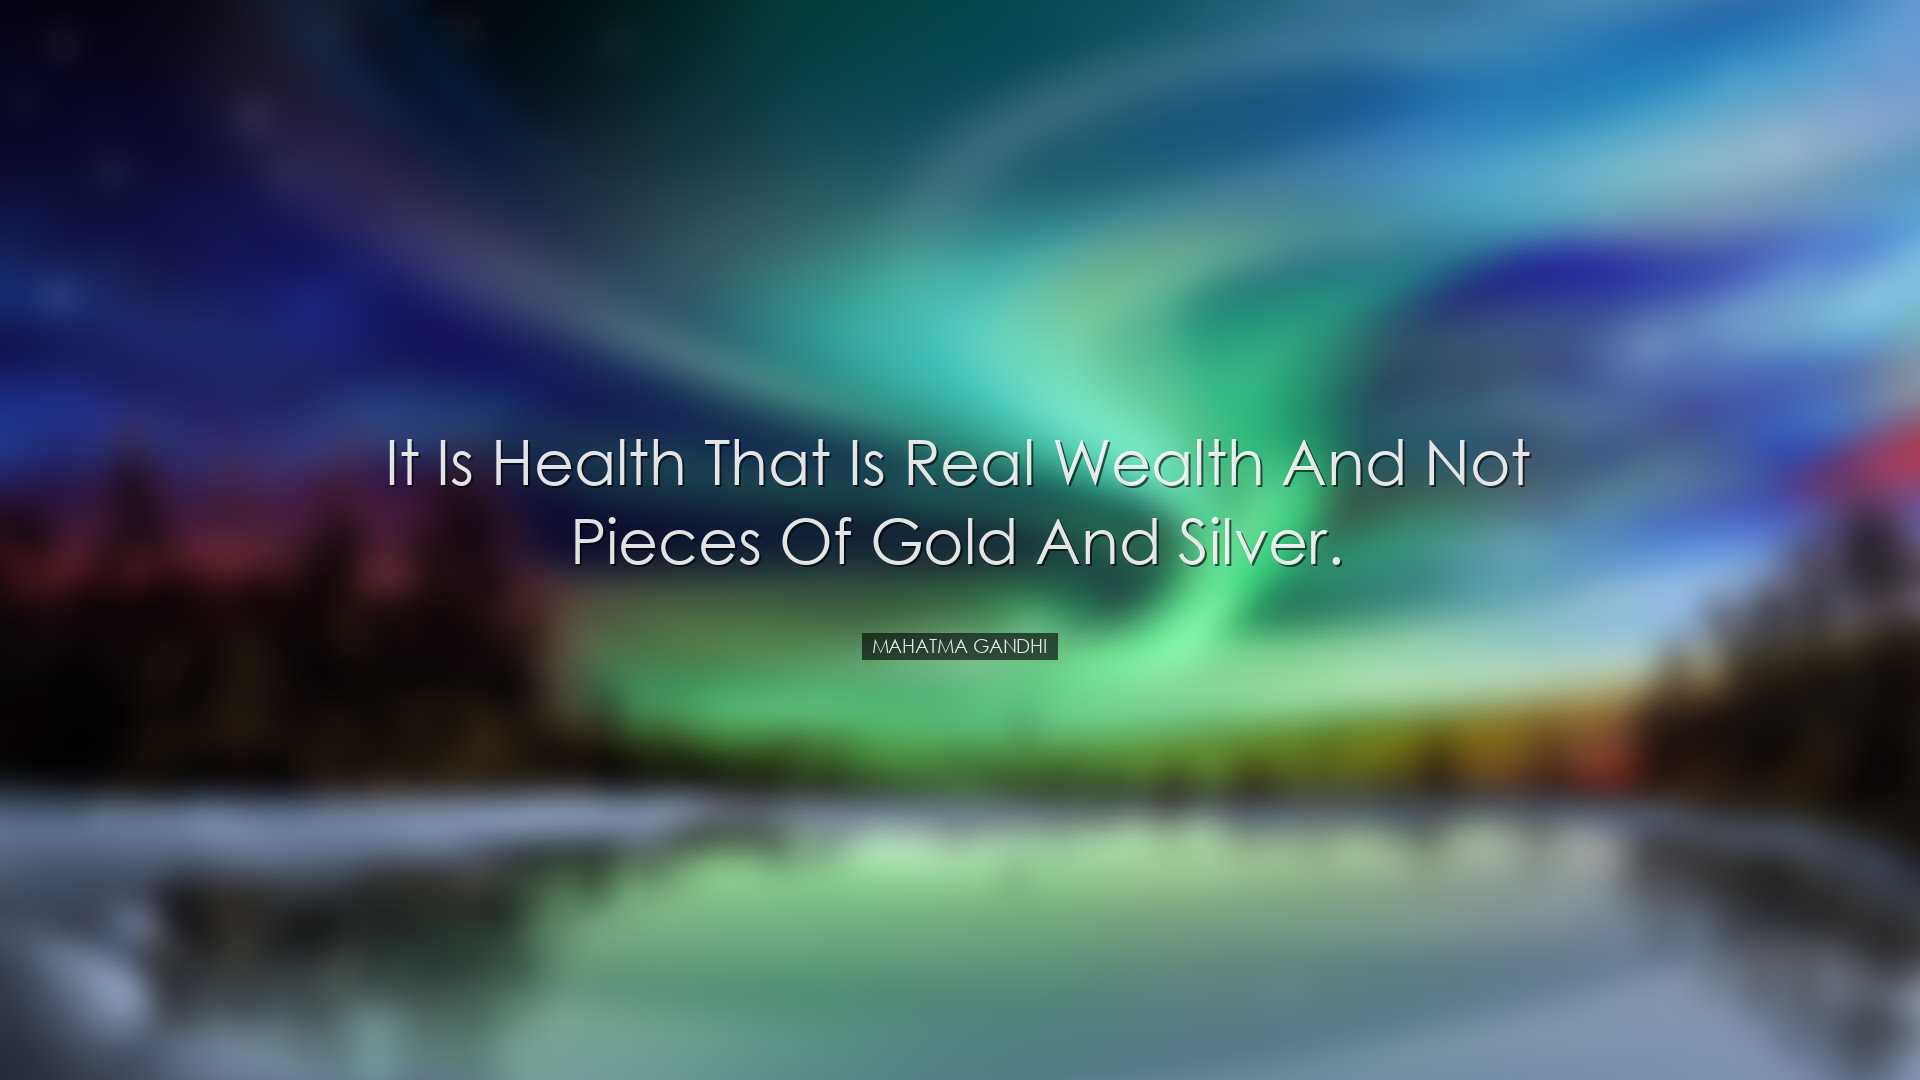 It is health that is real wealth and not pieces of gold and silver